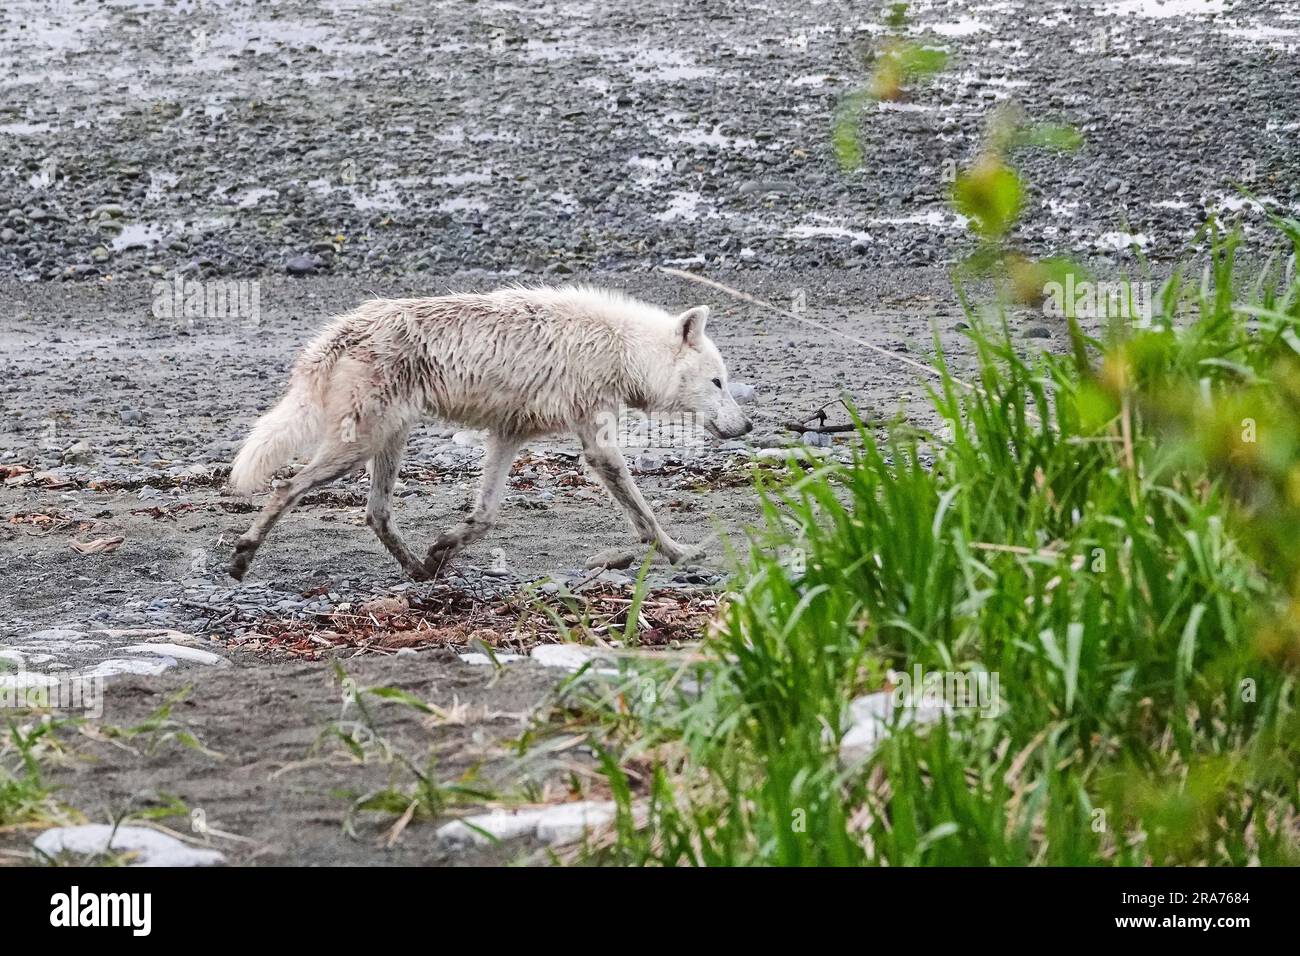 A lone white colored grey wolf walks along the beach at the remote McNeil River Wildlife Refuge, June 17, 2023 on the Katmai Peninsula, Alaska. The remote site is accessed only with a special permit and contains the world’s largest seasonal population of brown bears and other wildlife in a pristine environment. Stock Photo